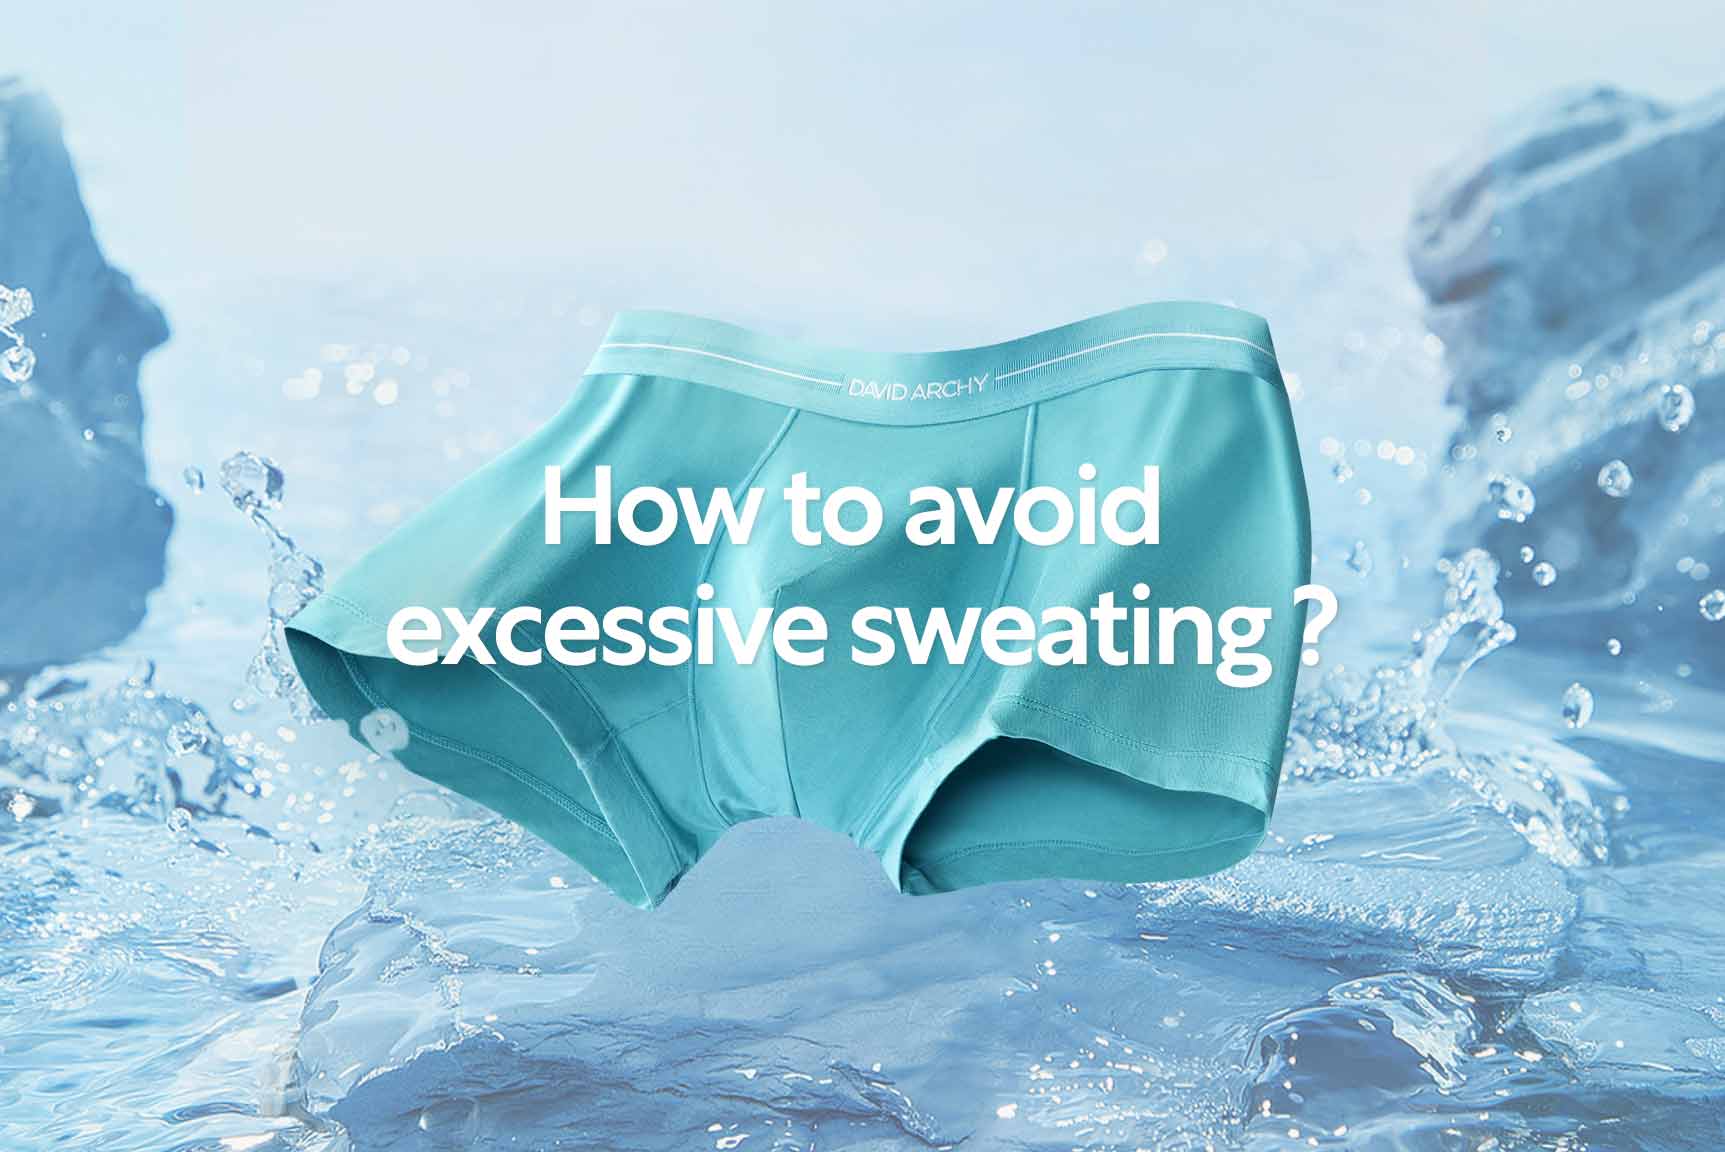 How to avoid excessive sweating?